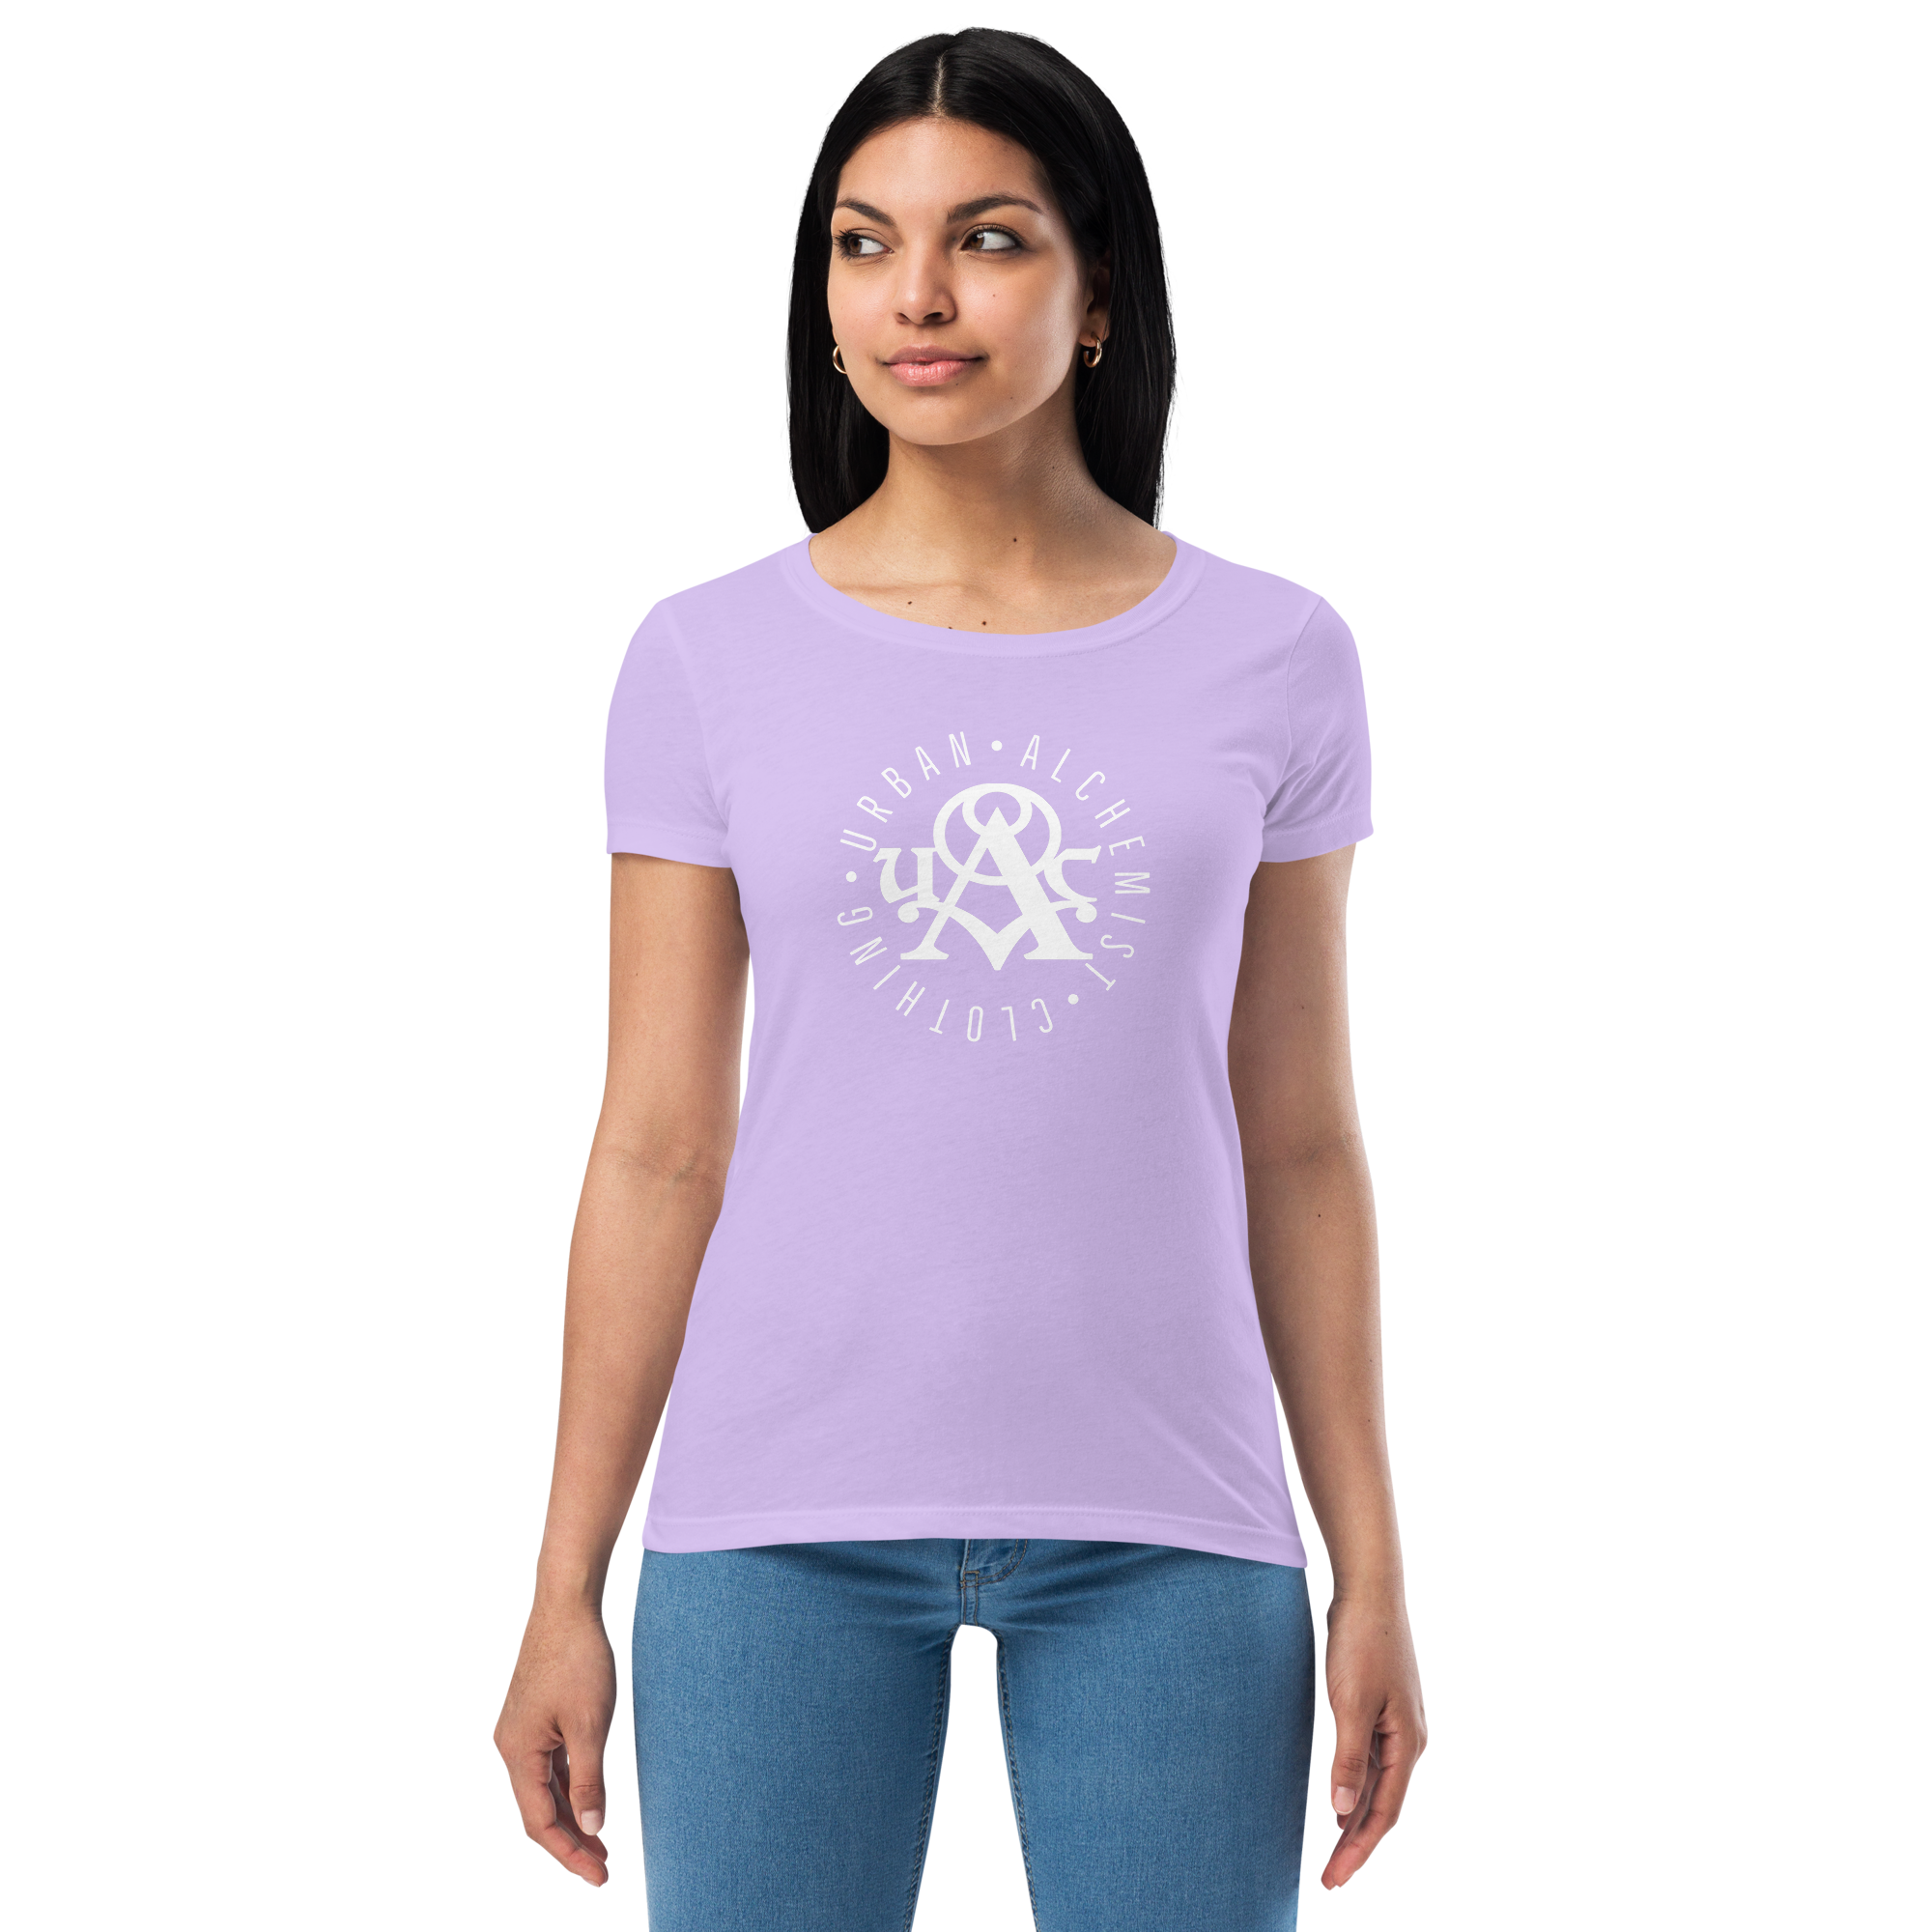 Tight Circle - Women’s fitted t-shirt